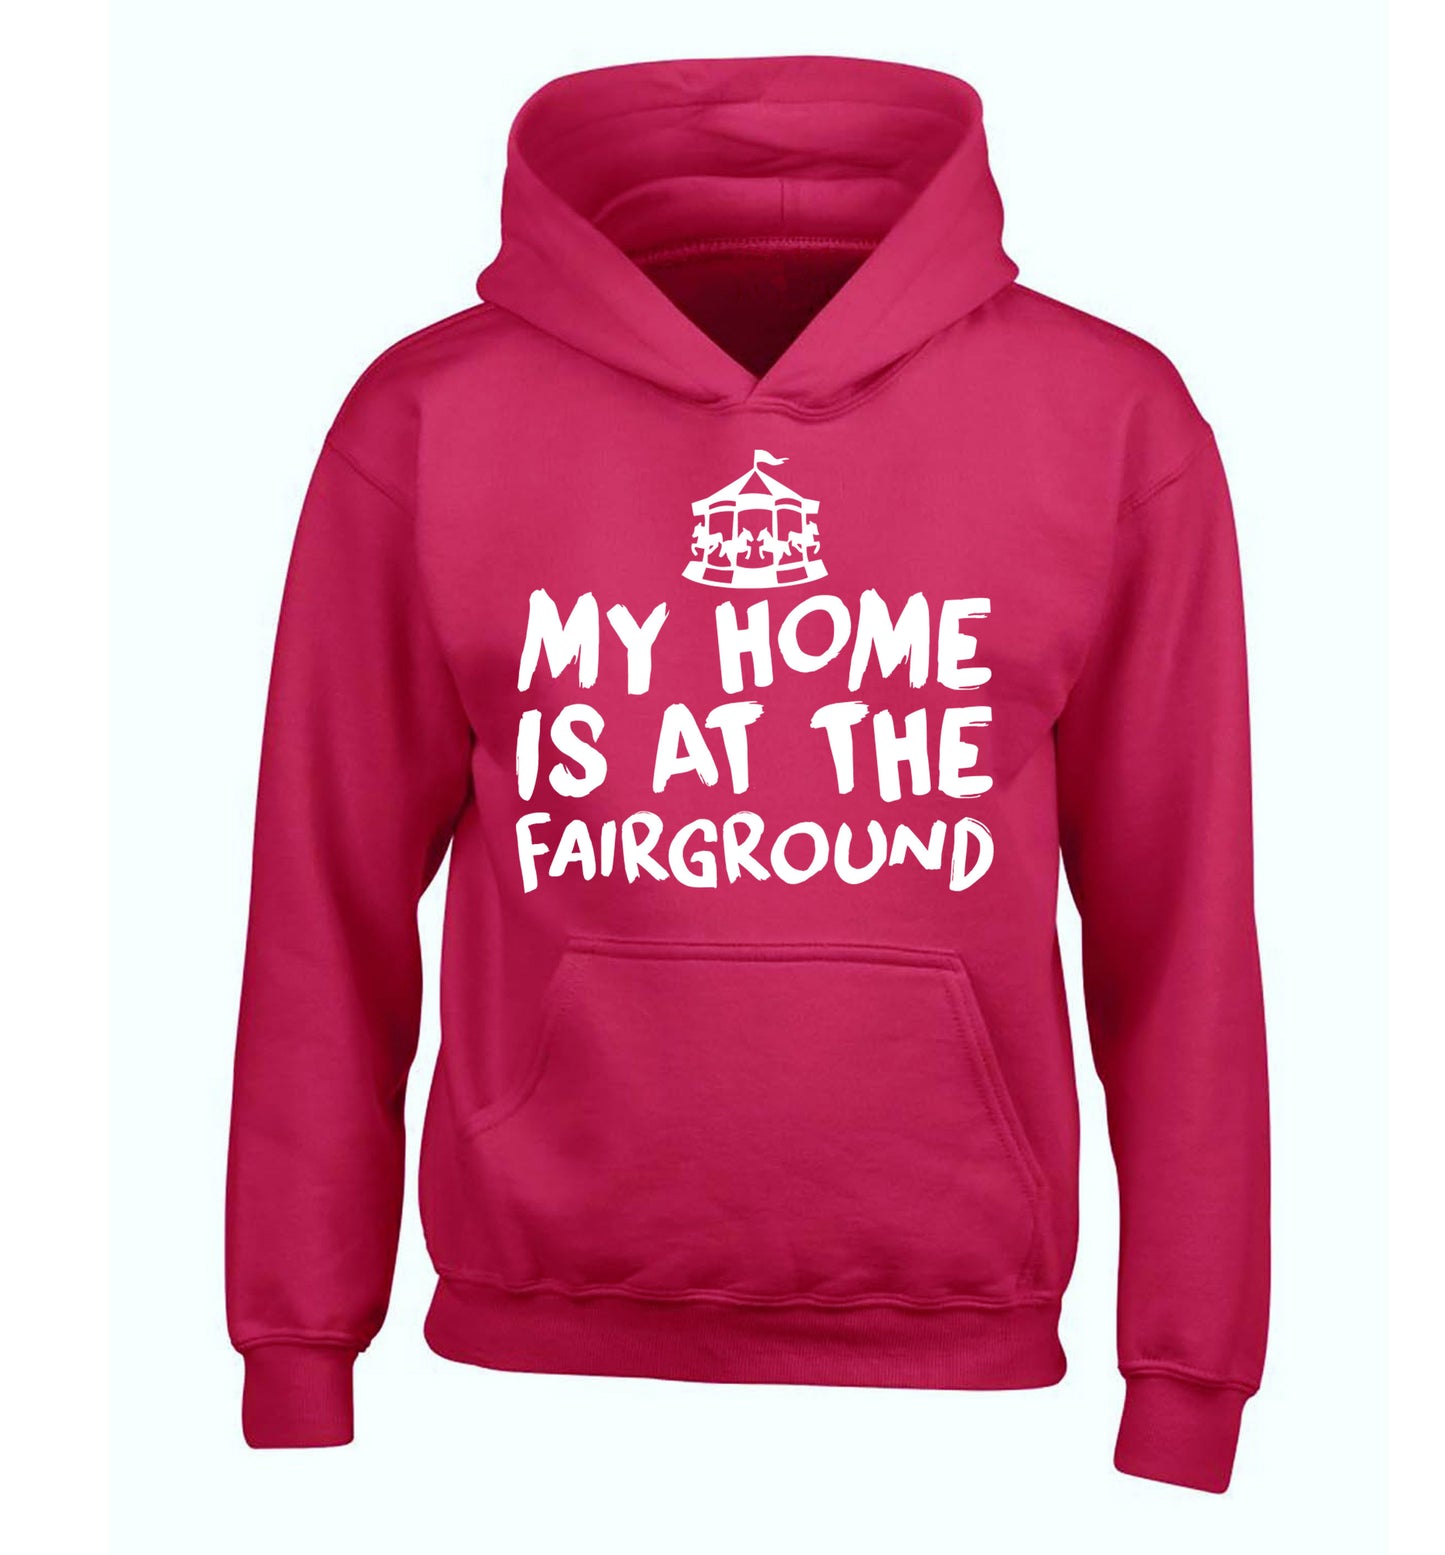 My home is at the fairground children's pink hoodie 12-14 Years